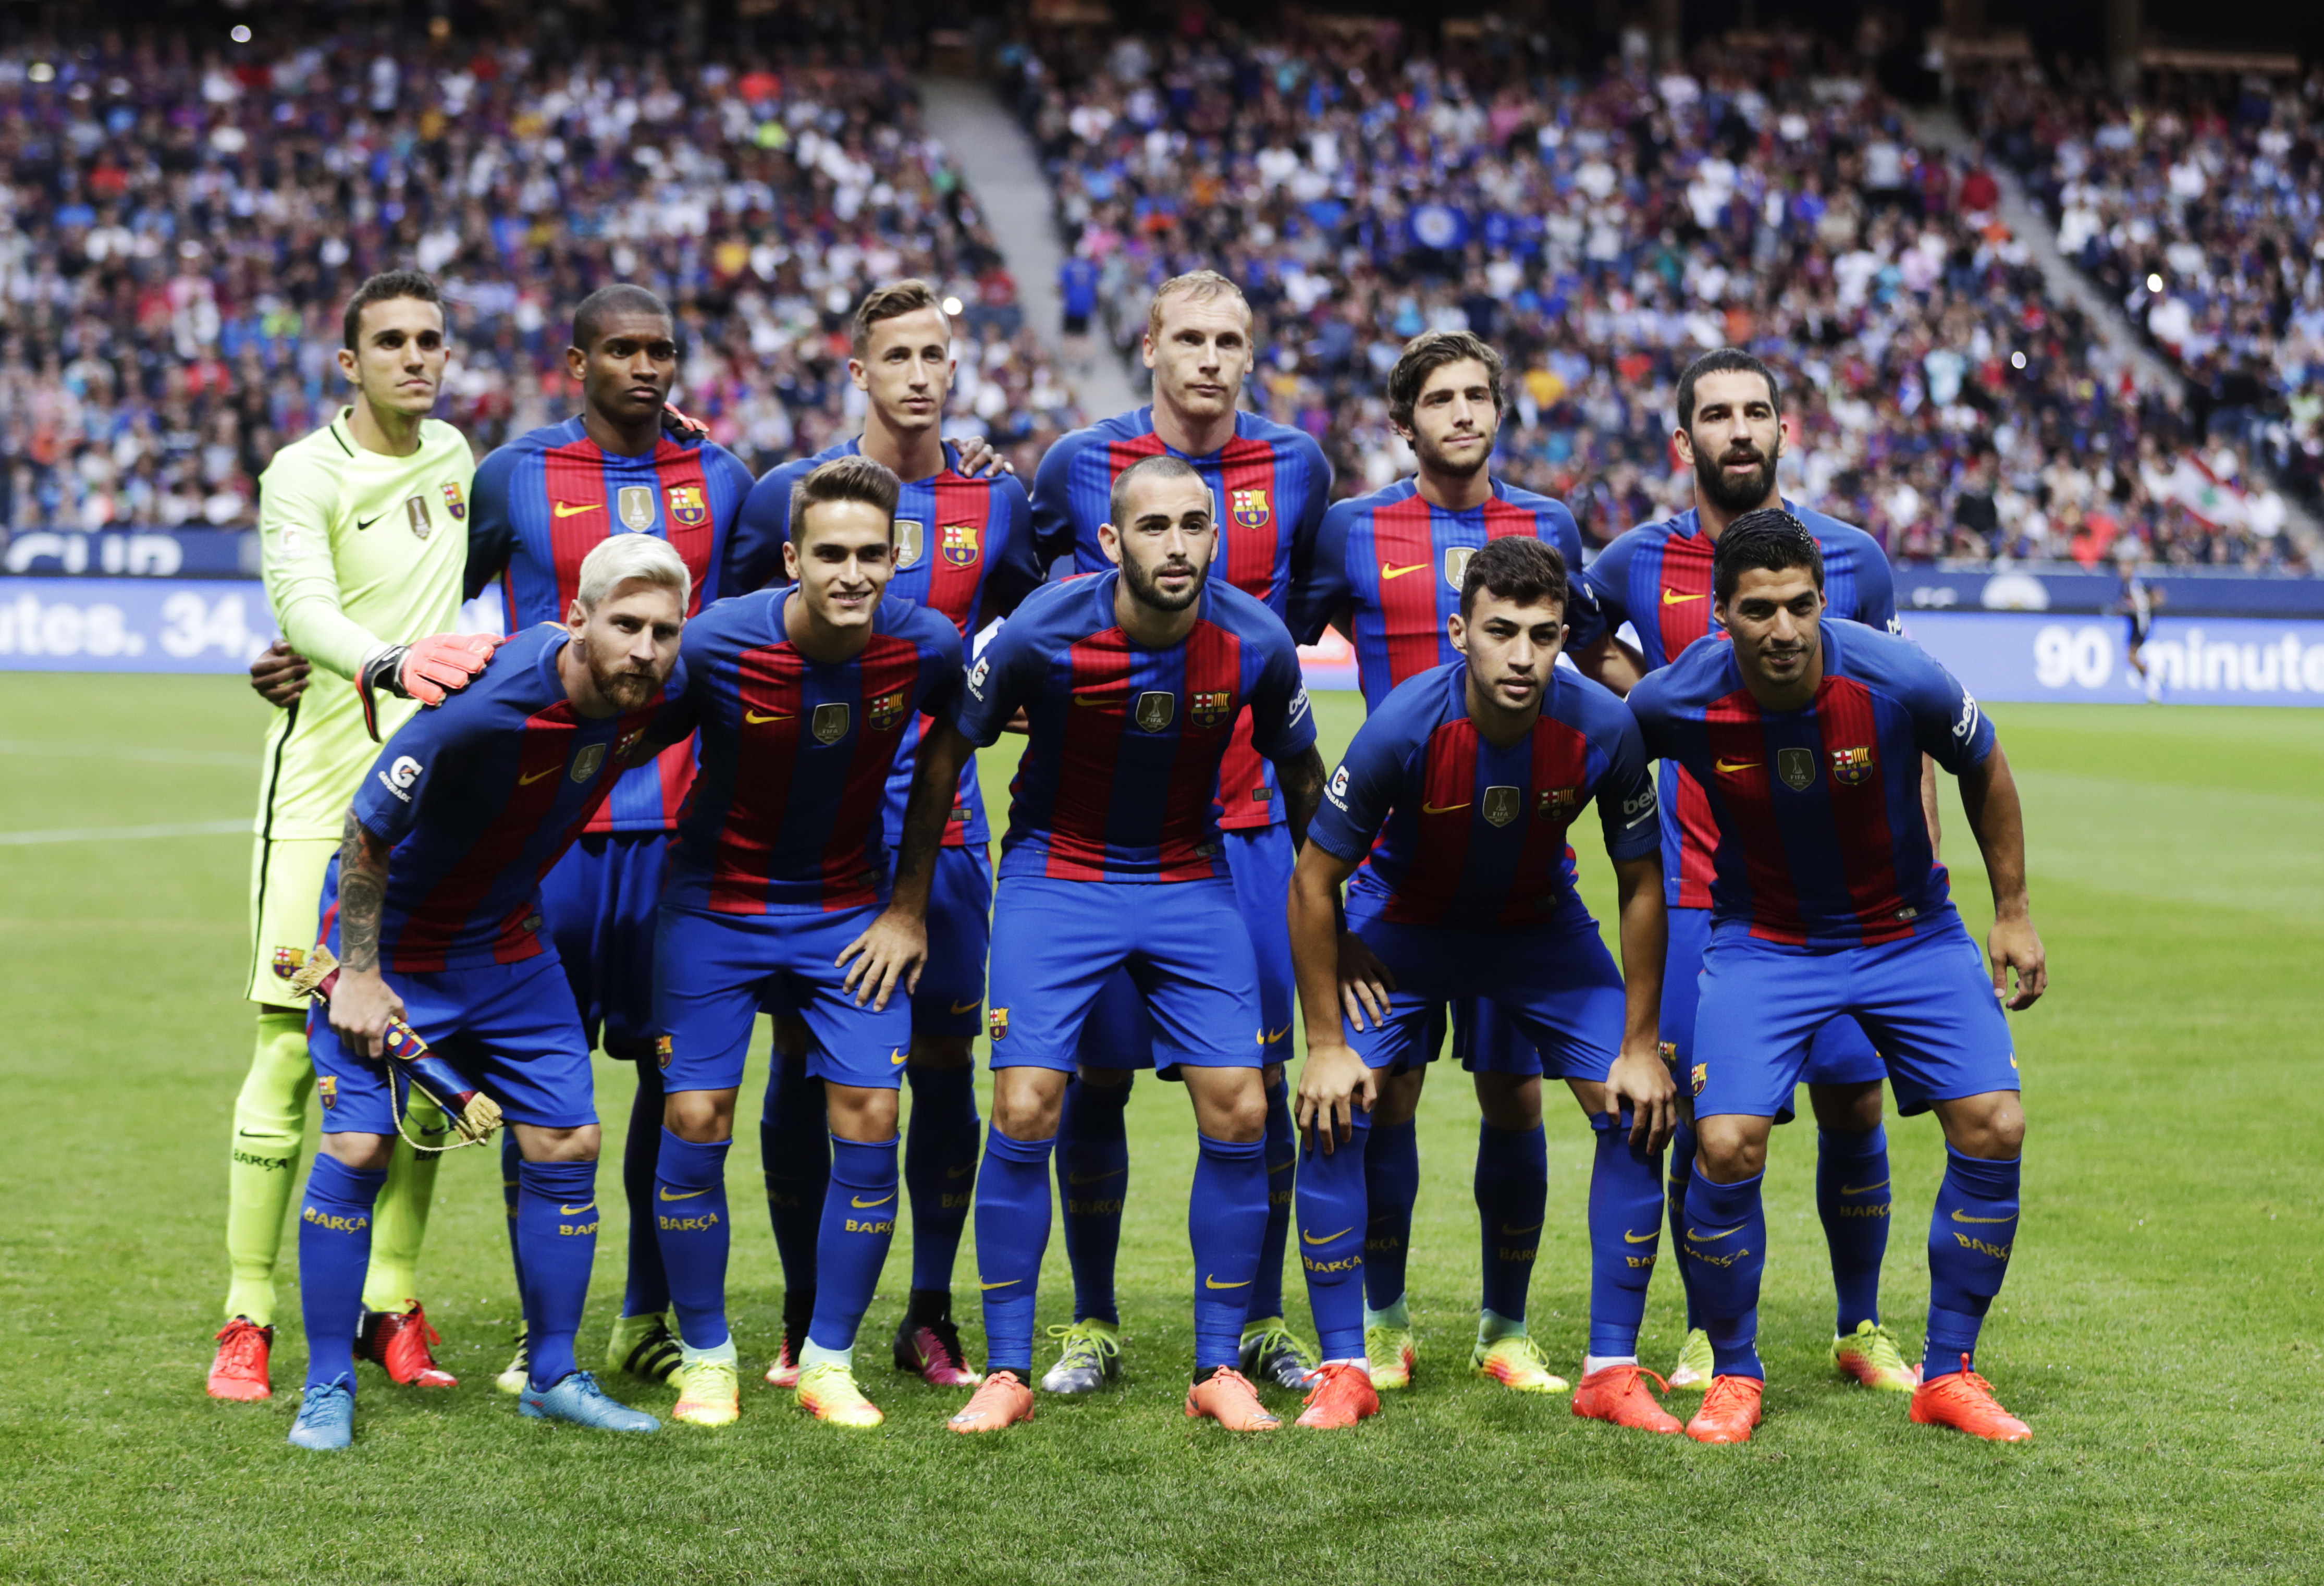 SOLNA, SWEDEN - AUGUST 03: Jordi Masip Lopez, Denis Suarez, Arda Turan, Luis Suarez, Lionel Messi, Marlon Santos, Munir, Juan Camara, Sergi Roberto, Aleix Vidal and Jeremy Mathieu pose for a photo ahead of the 2016 International Champions Cup Leicester City FC and FC Barcelona at Friends arena on August 3, 2016 in Solna, Sweden. (Photo by Nils Petter Nilsson/Ombrello/Getty Images)